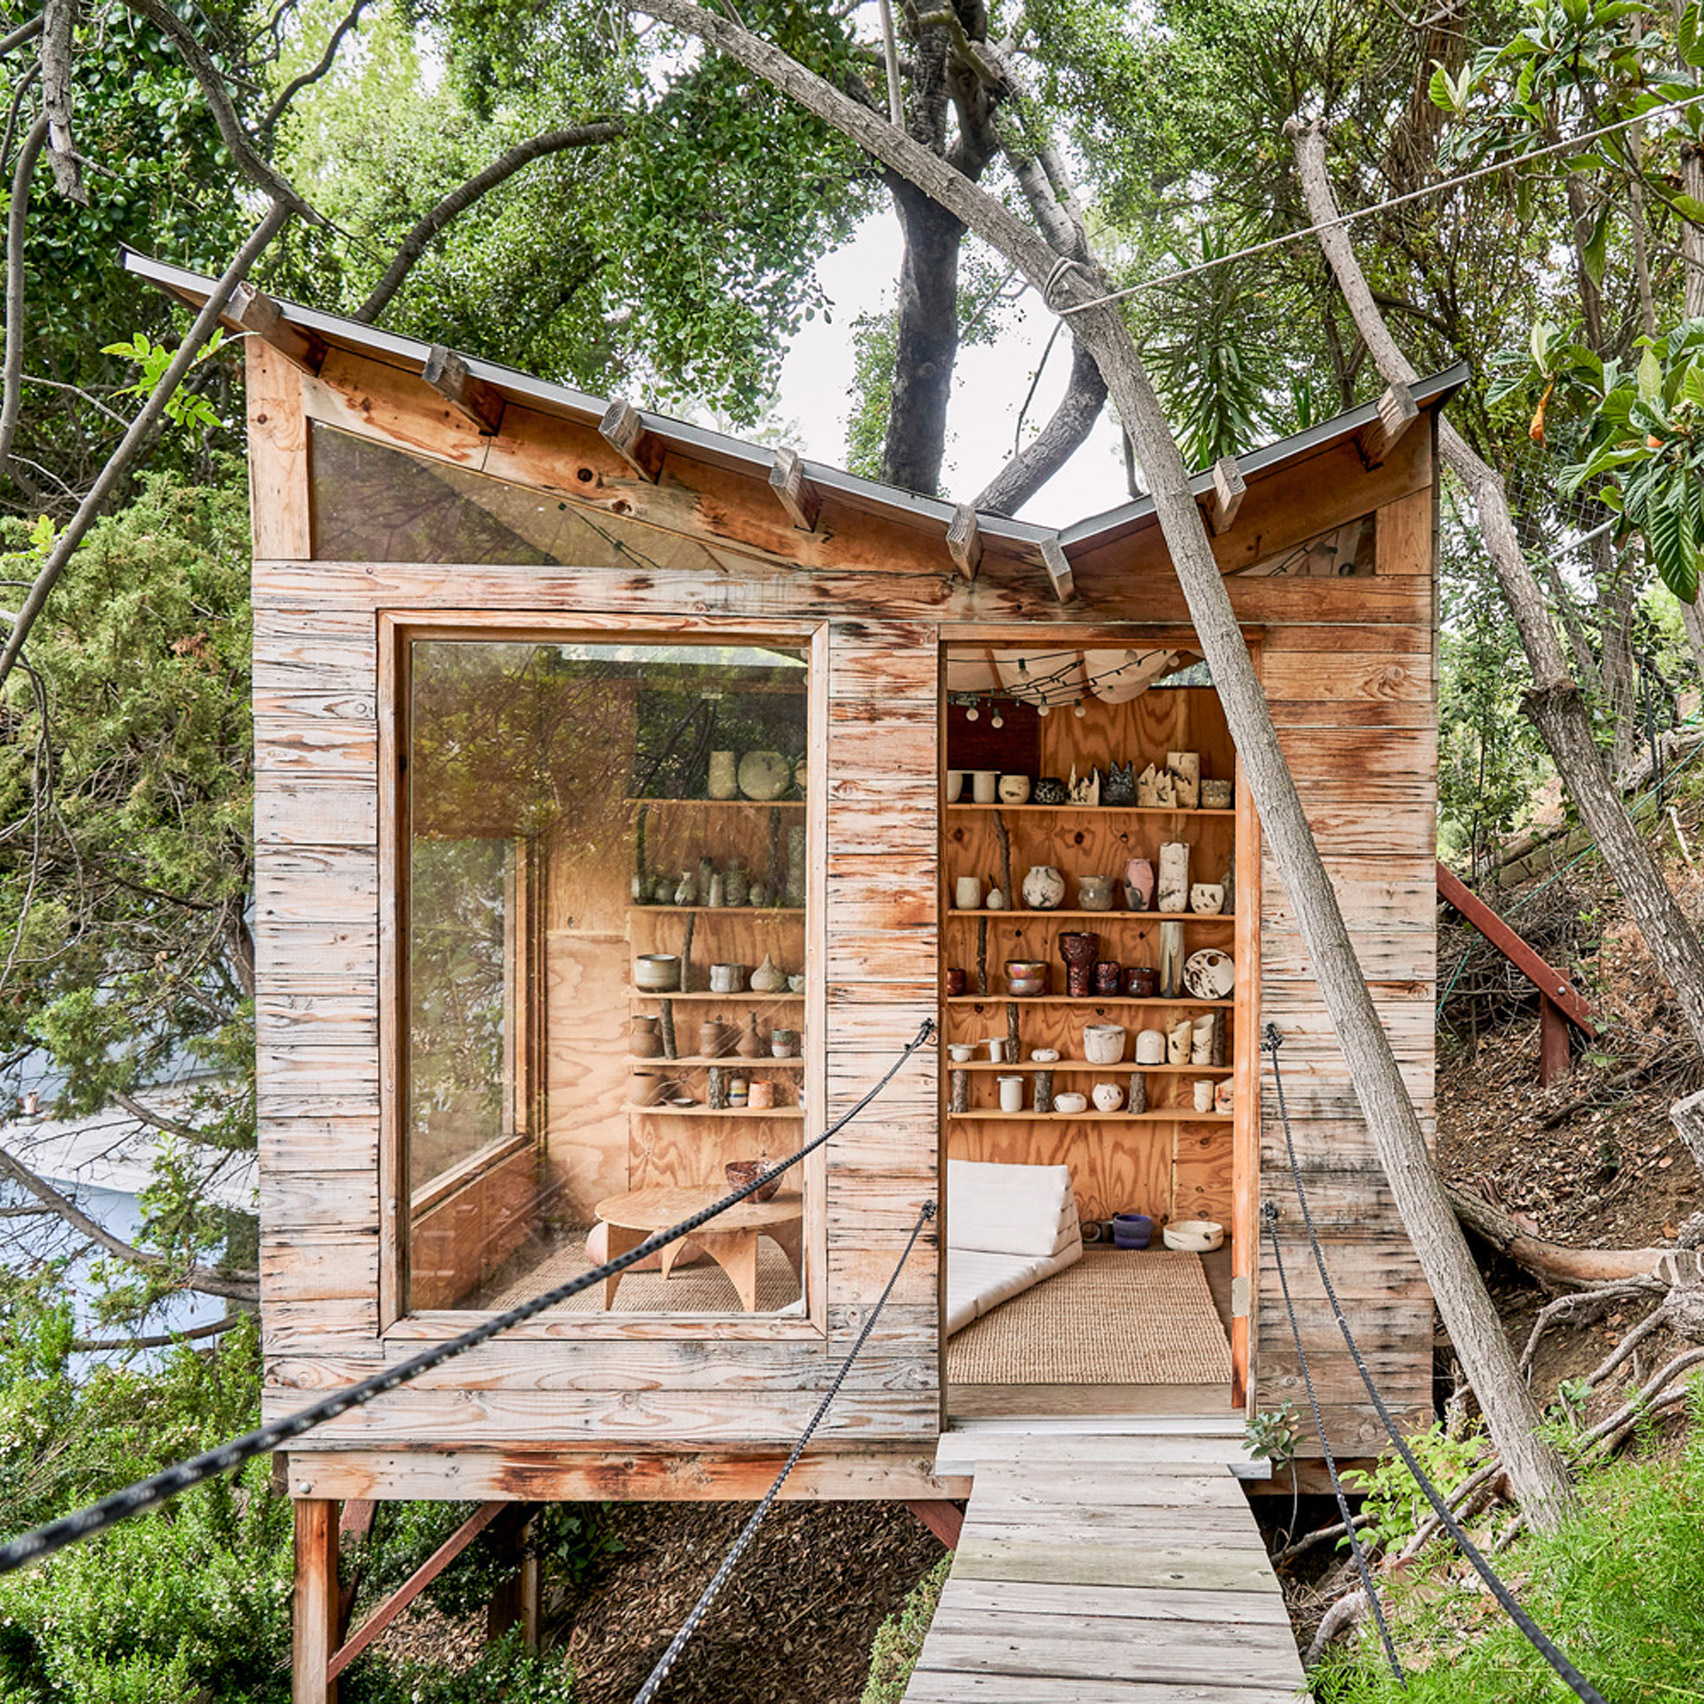 Exterior of stilted LA Pottery Studio by Raina Lee and Mark Watanabe